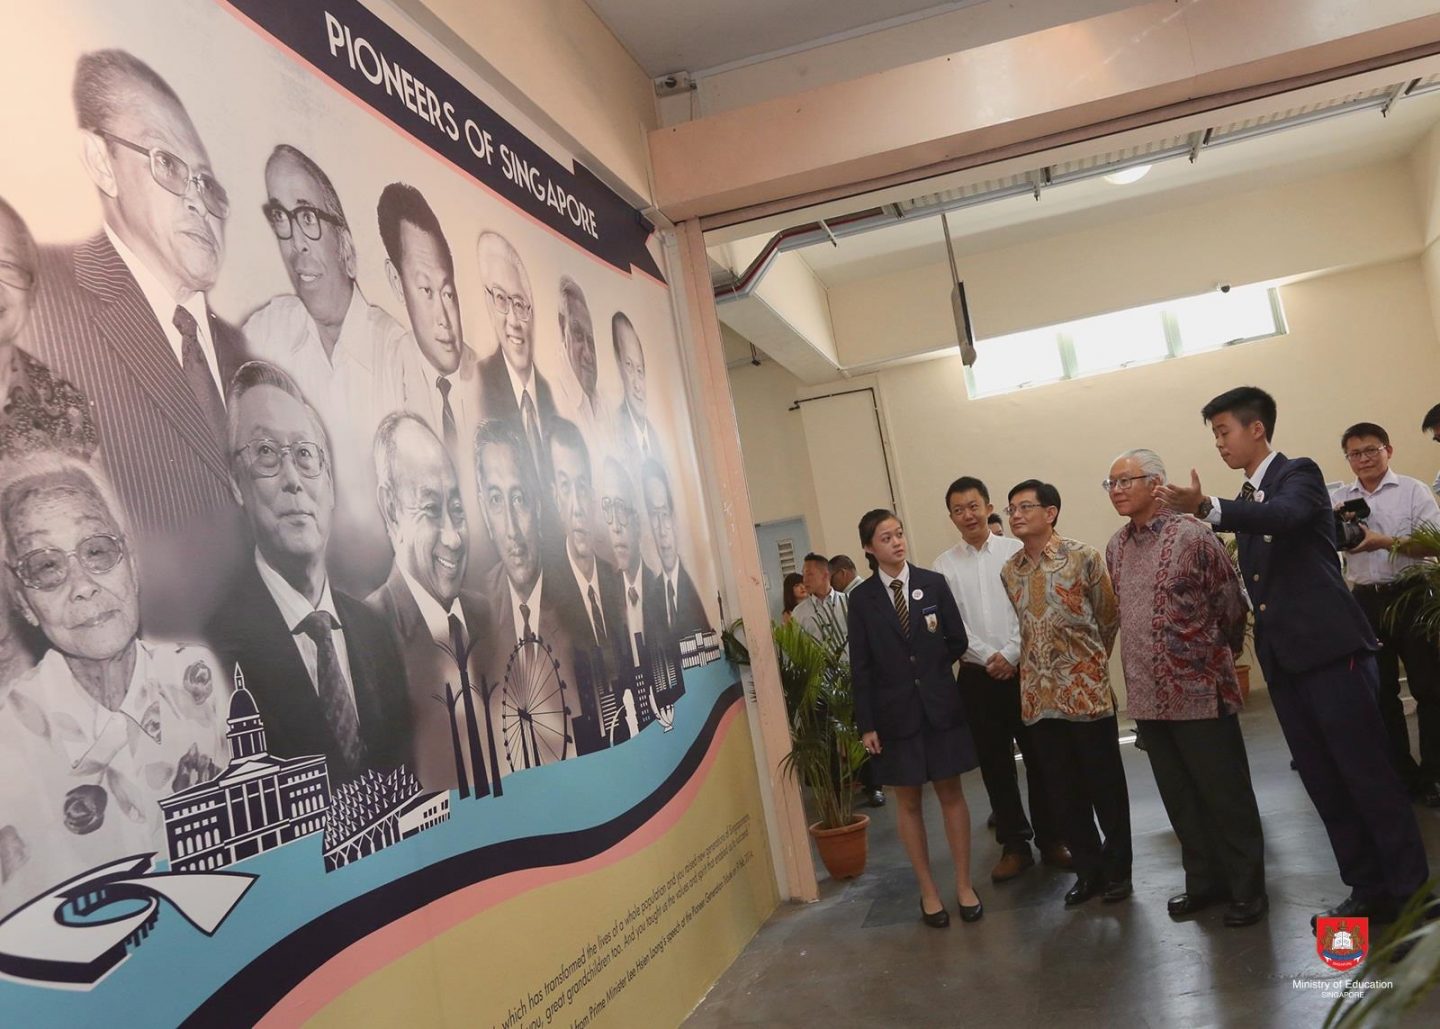 Student leaders from Presbyterian High School (PHS) showing the Pioneer Generation Wall to President Dr Tony Tan in 2015. In 1978, just 13 years after the school (formerly known as Li Sun High School) was set up, the Presbyterian Synod wanted to shut the school due to poor enrolment. But the late Rev Lee stepped in, helping to turn the school around. Photo from Ministry of Education, Singapore's Facebook.